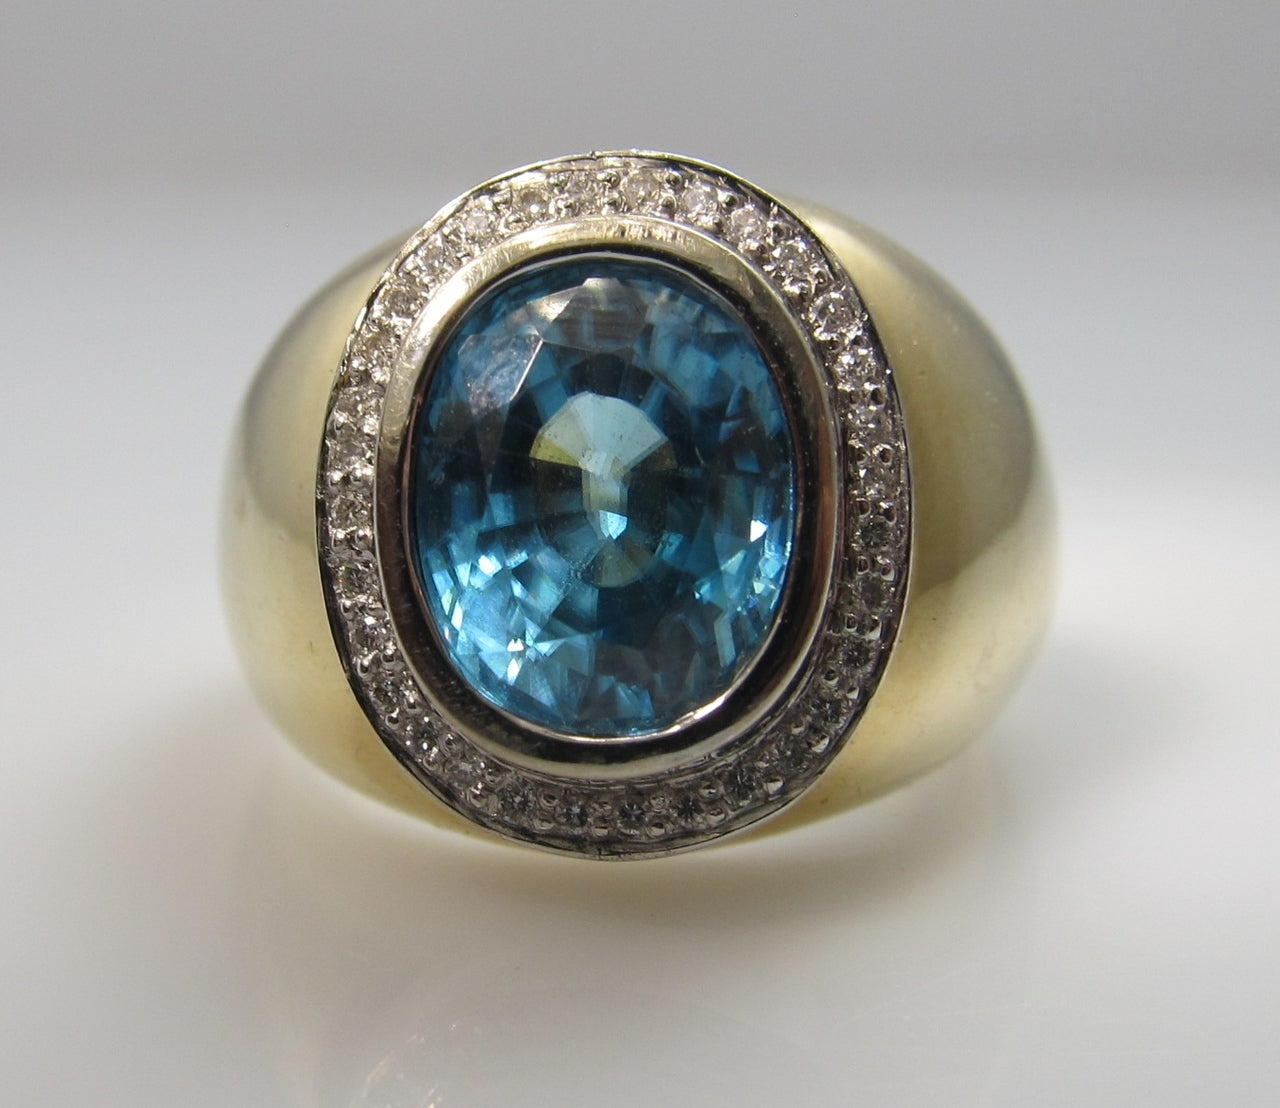 Modern Estate 14k Ring With A 5.00ct Blue Zircon And .20cts In Diamonds